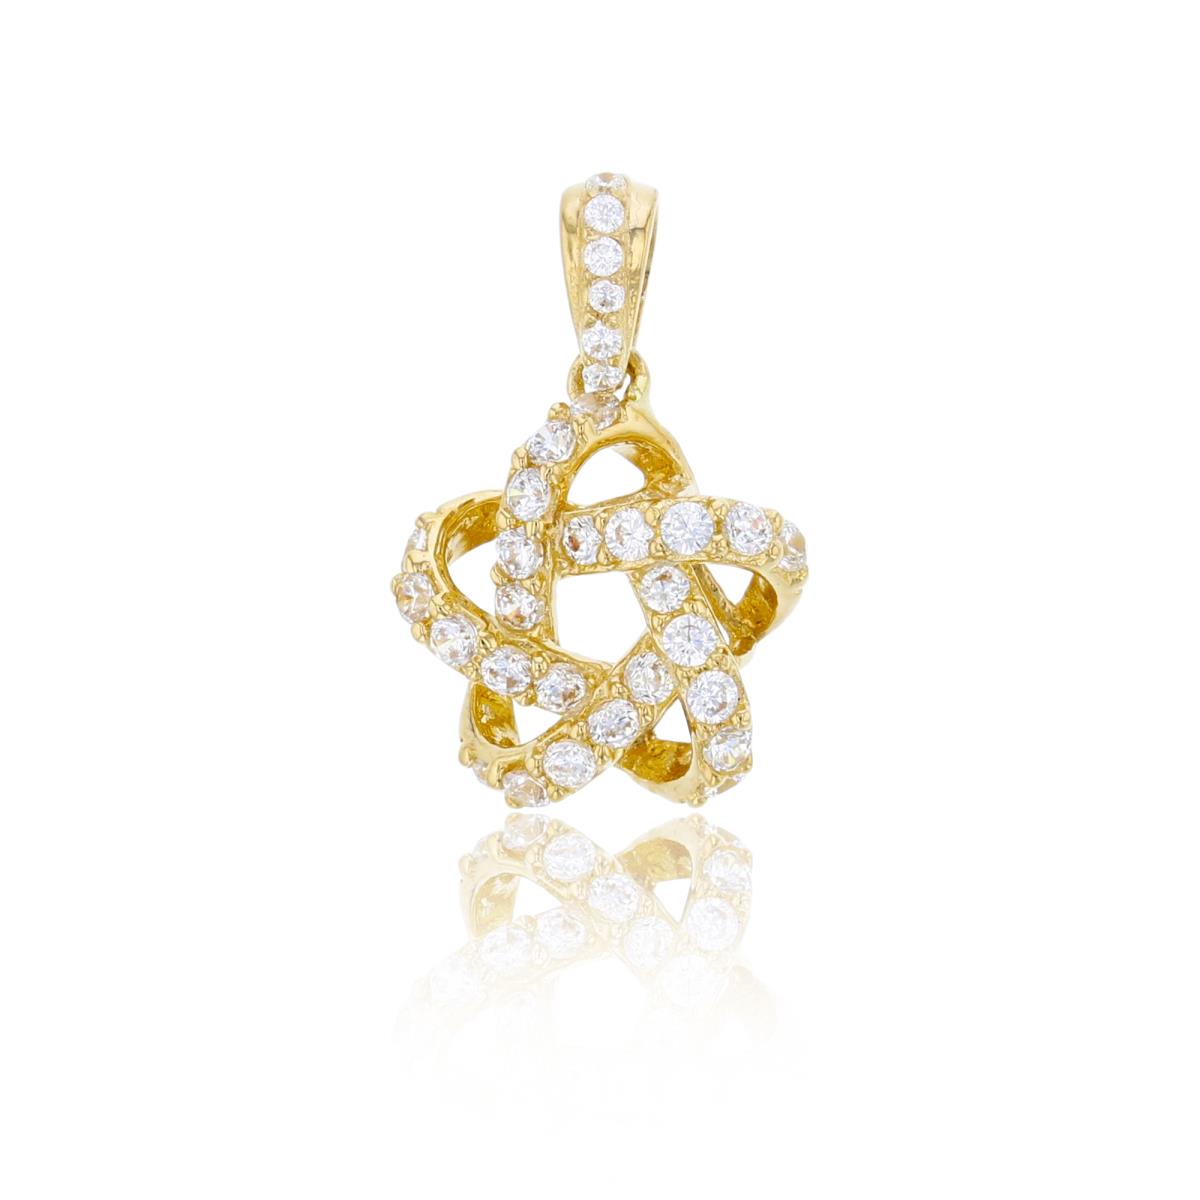 10K Yellow Gold 18x11mm Micropave CZ Star Knot Pendant